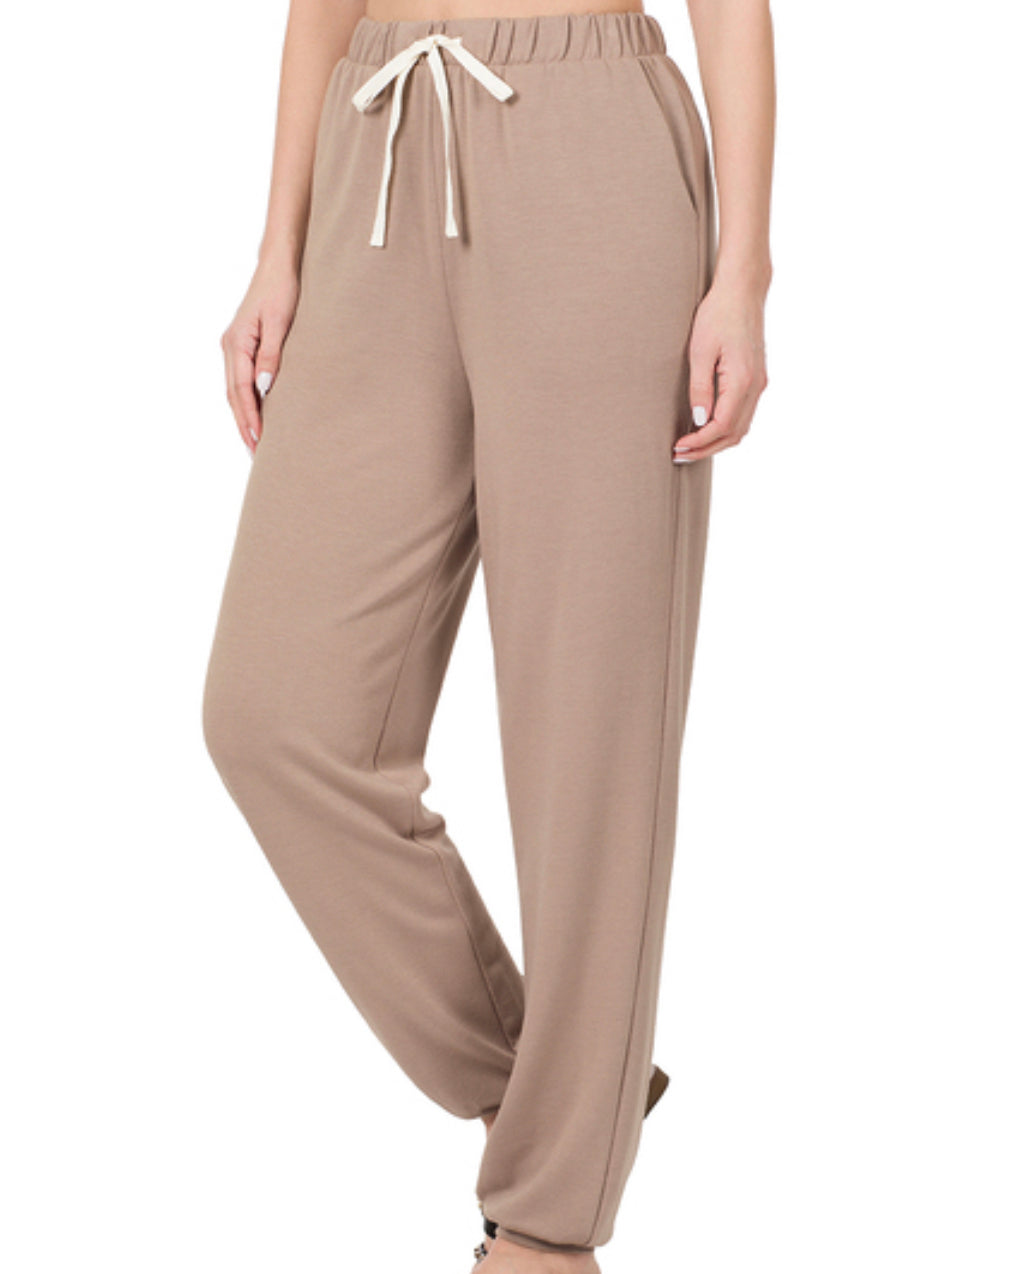 French Terry Jogger Pants(S-XL)(2 Colors)